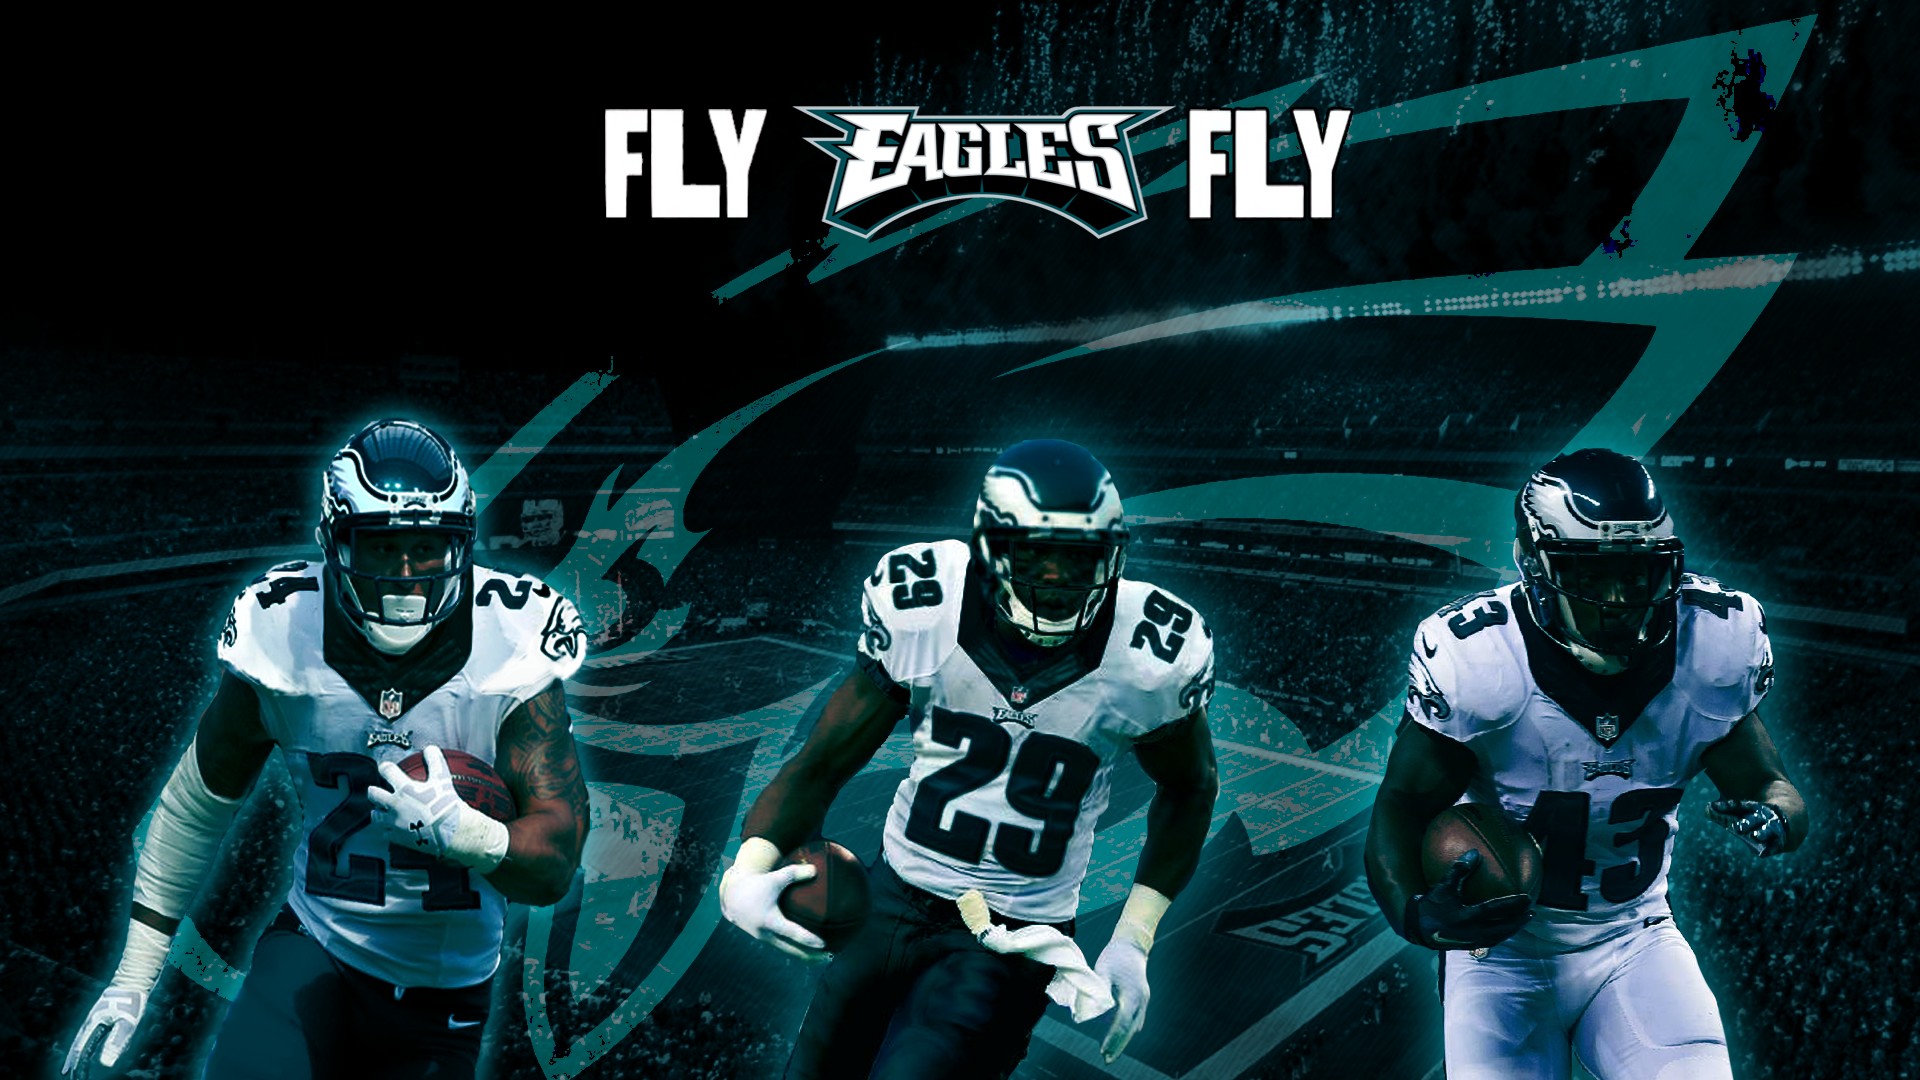 The Eagles Wallpaper For Mac Backgrounds With Resolution 1920X1080 pixel. You can make this wallpaper for your Mac or Windows Desktop Background, iPhone, Android or Tablet and another Smartphone device for free